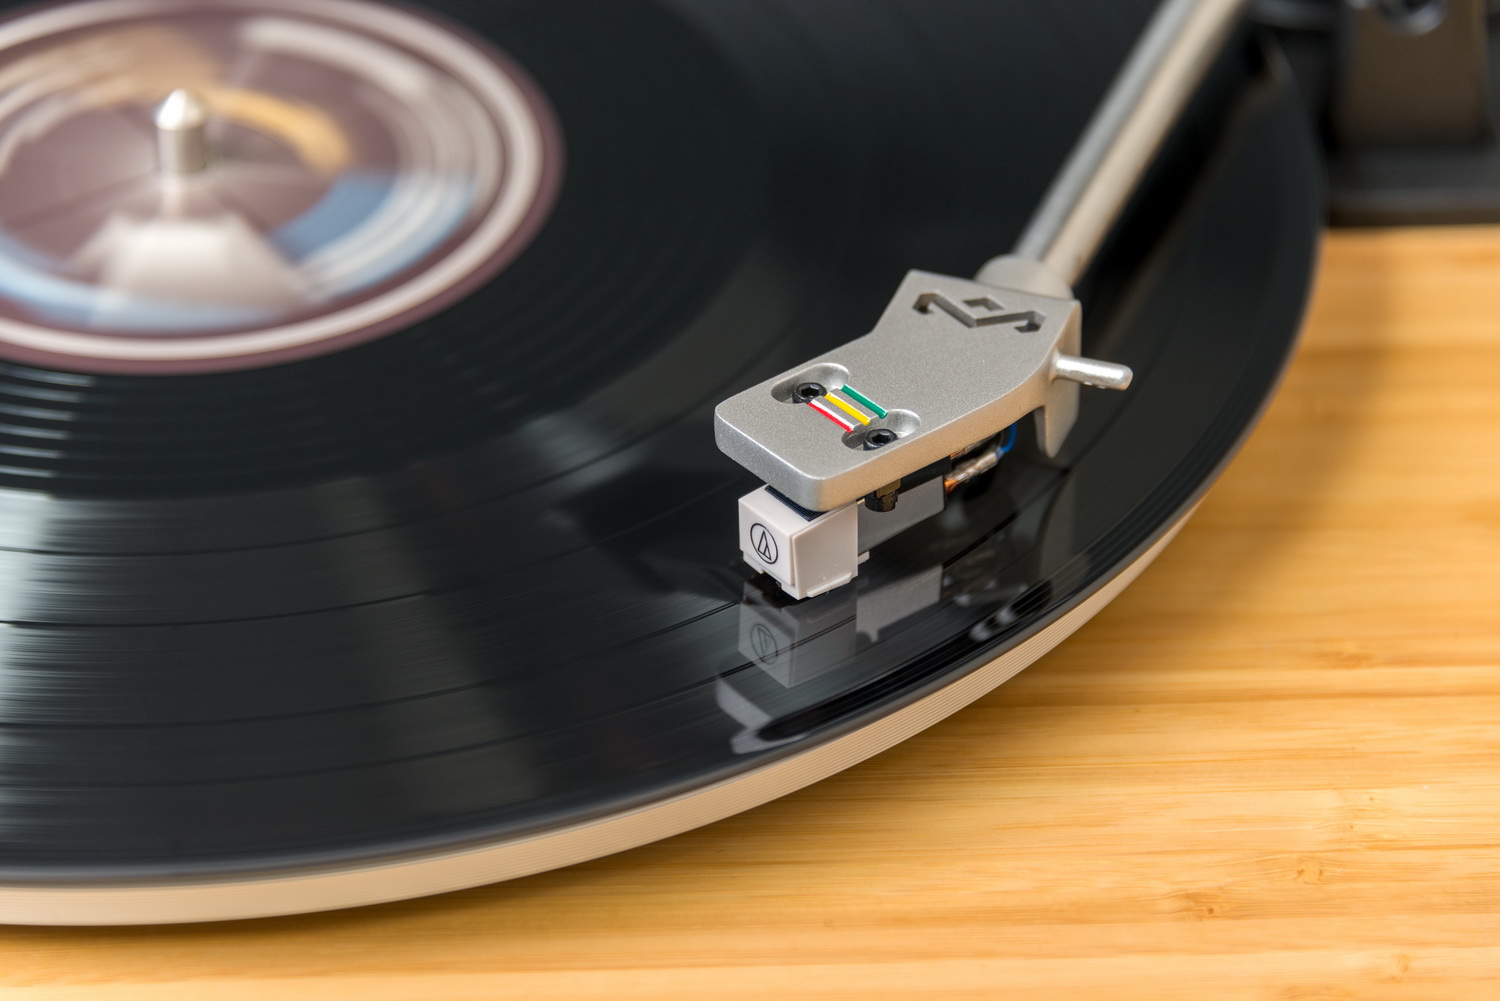 House of Marley Stir It Up Turntable: A Turntable That's Good for